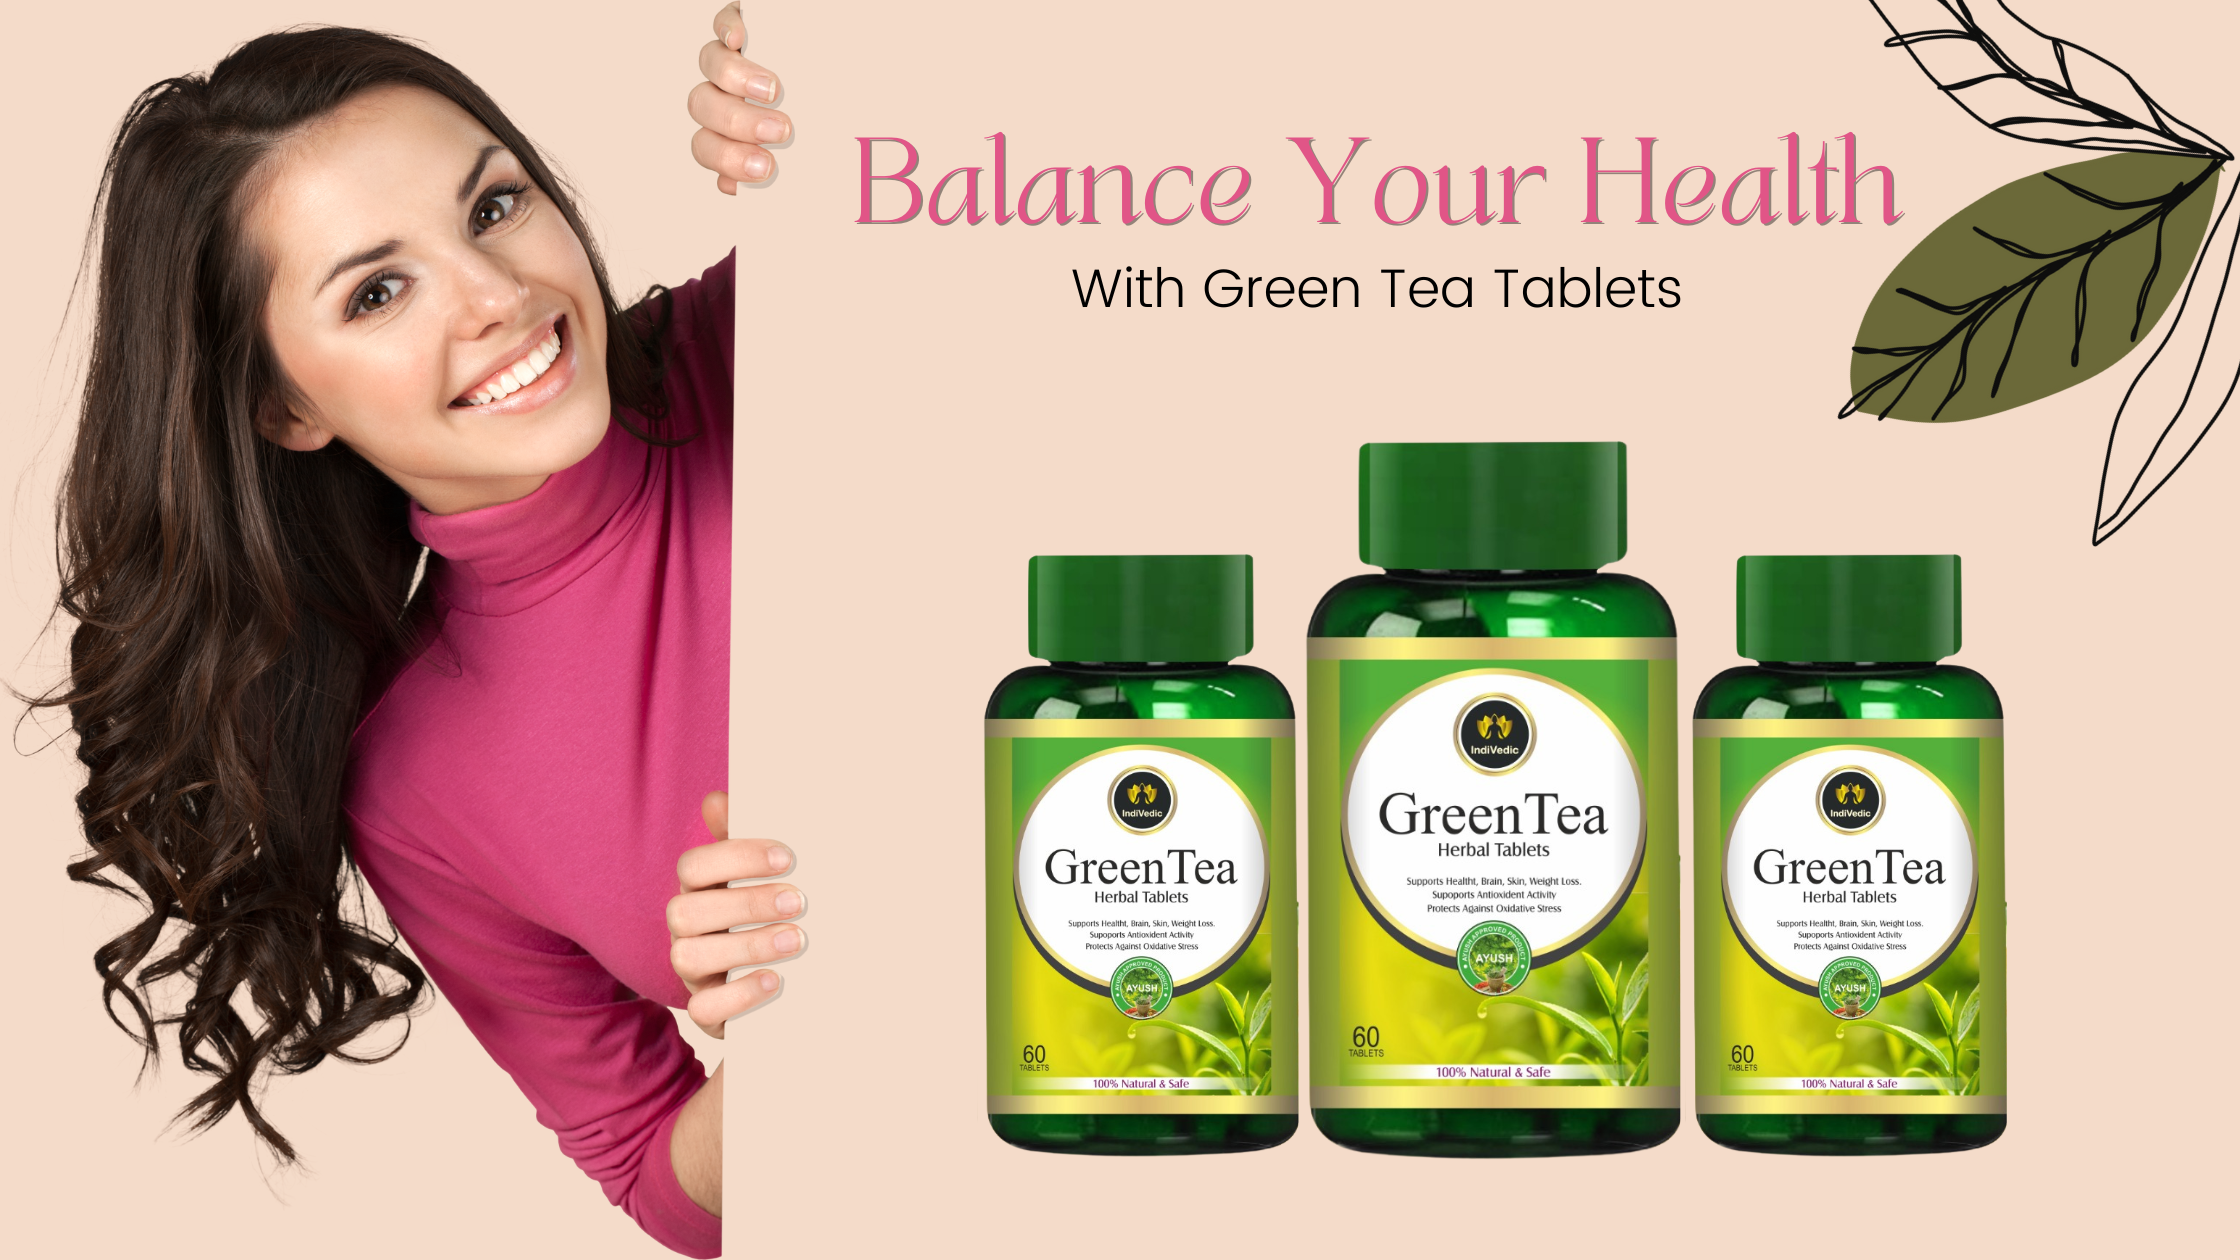 The Best Times to Take Green Tea Tablets